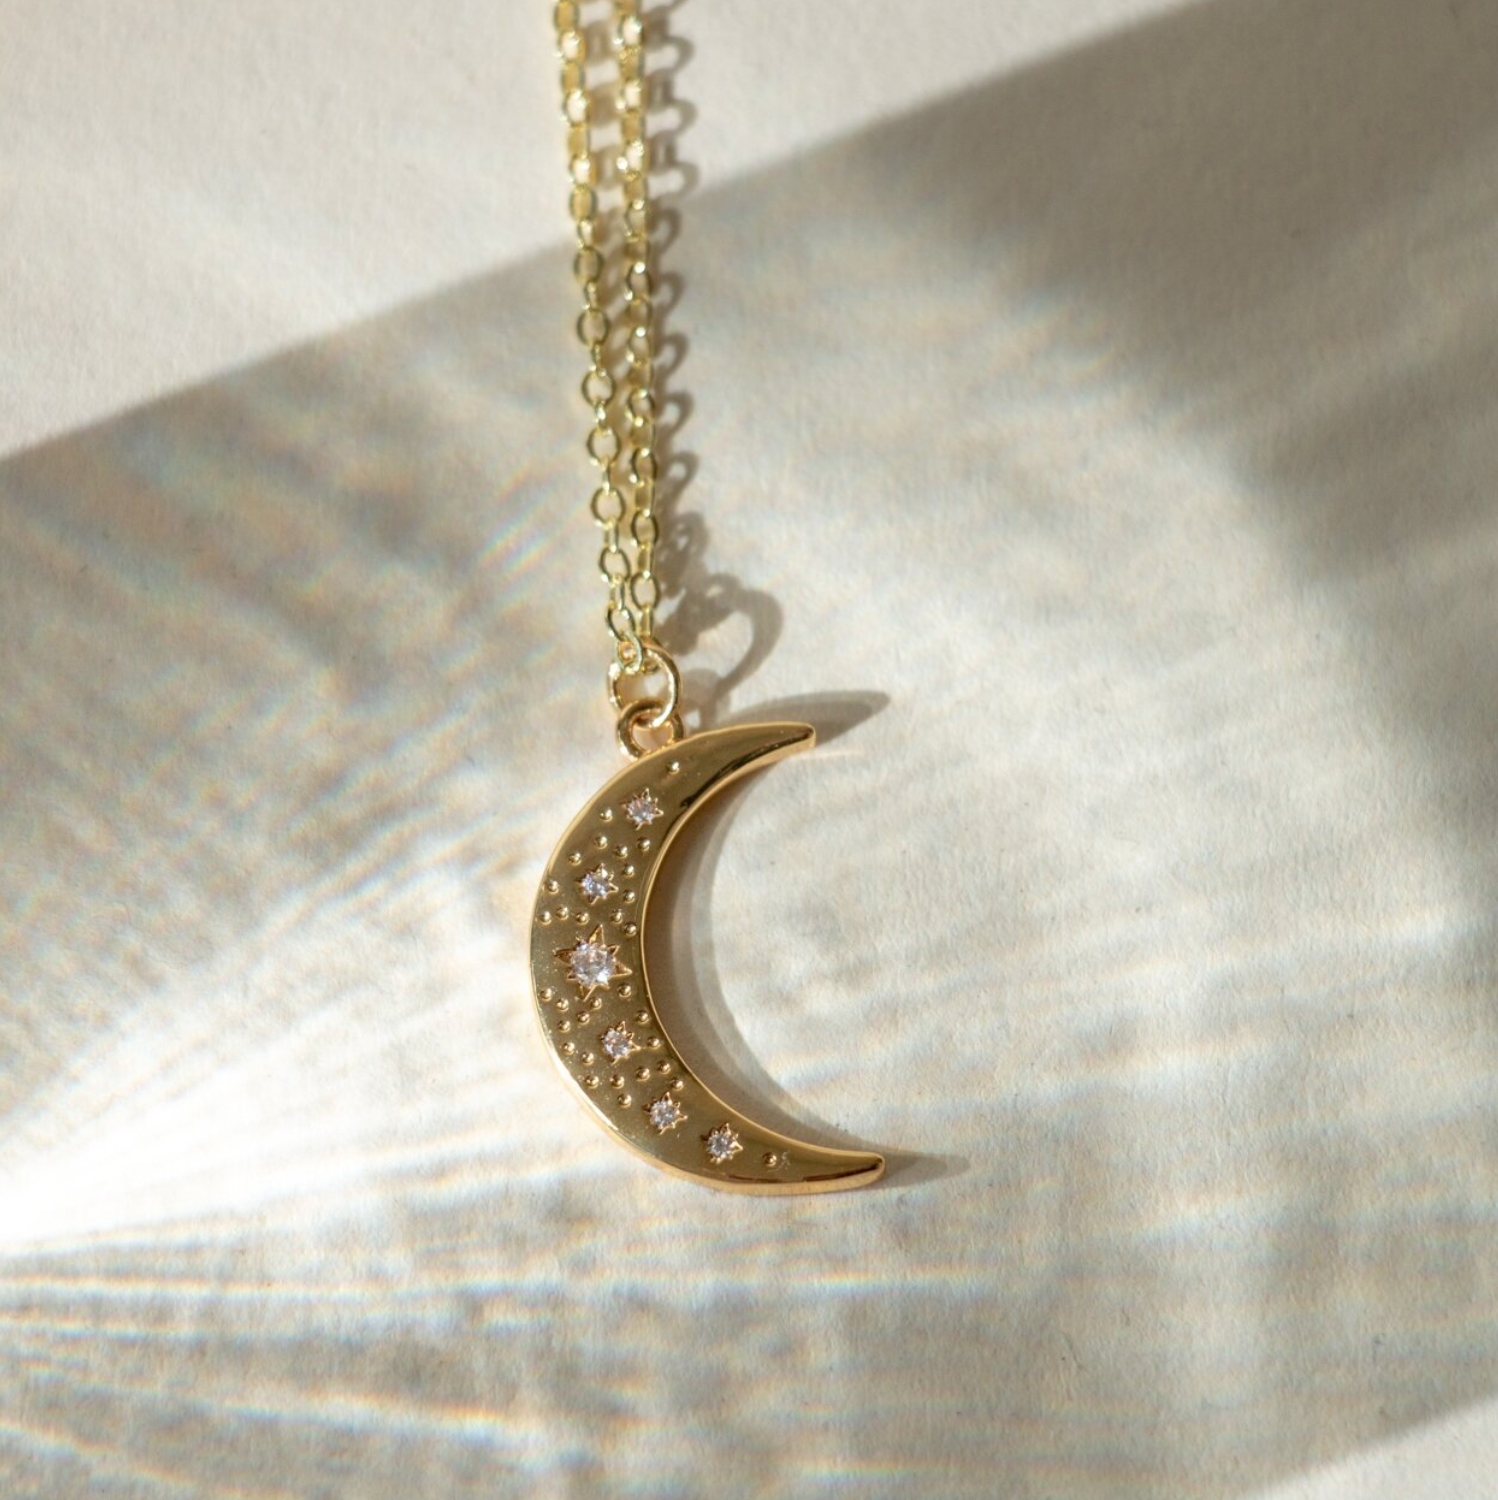 Moon necklace pendant - Hairy Growler - The silver Moon (tells you a secret)